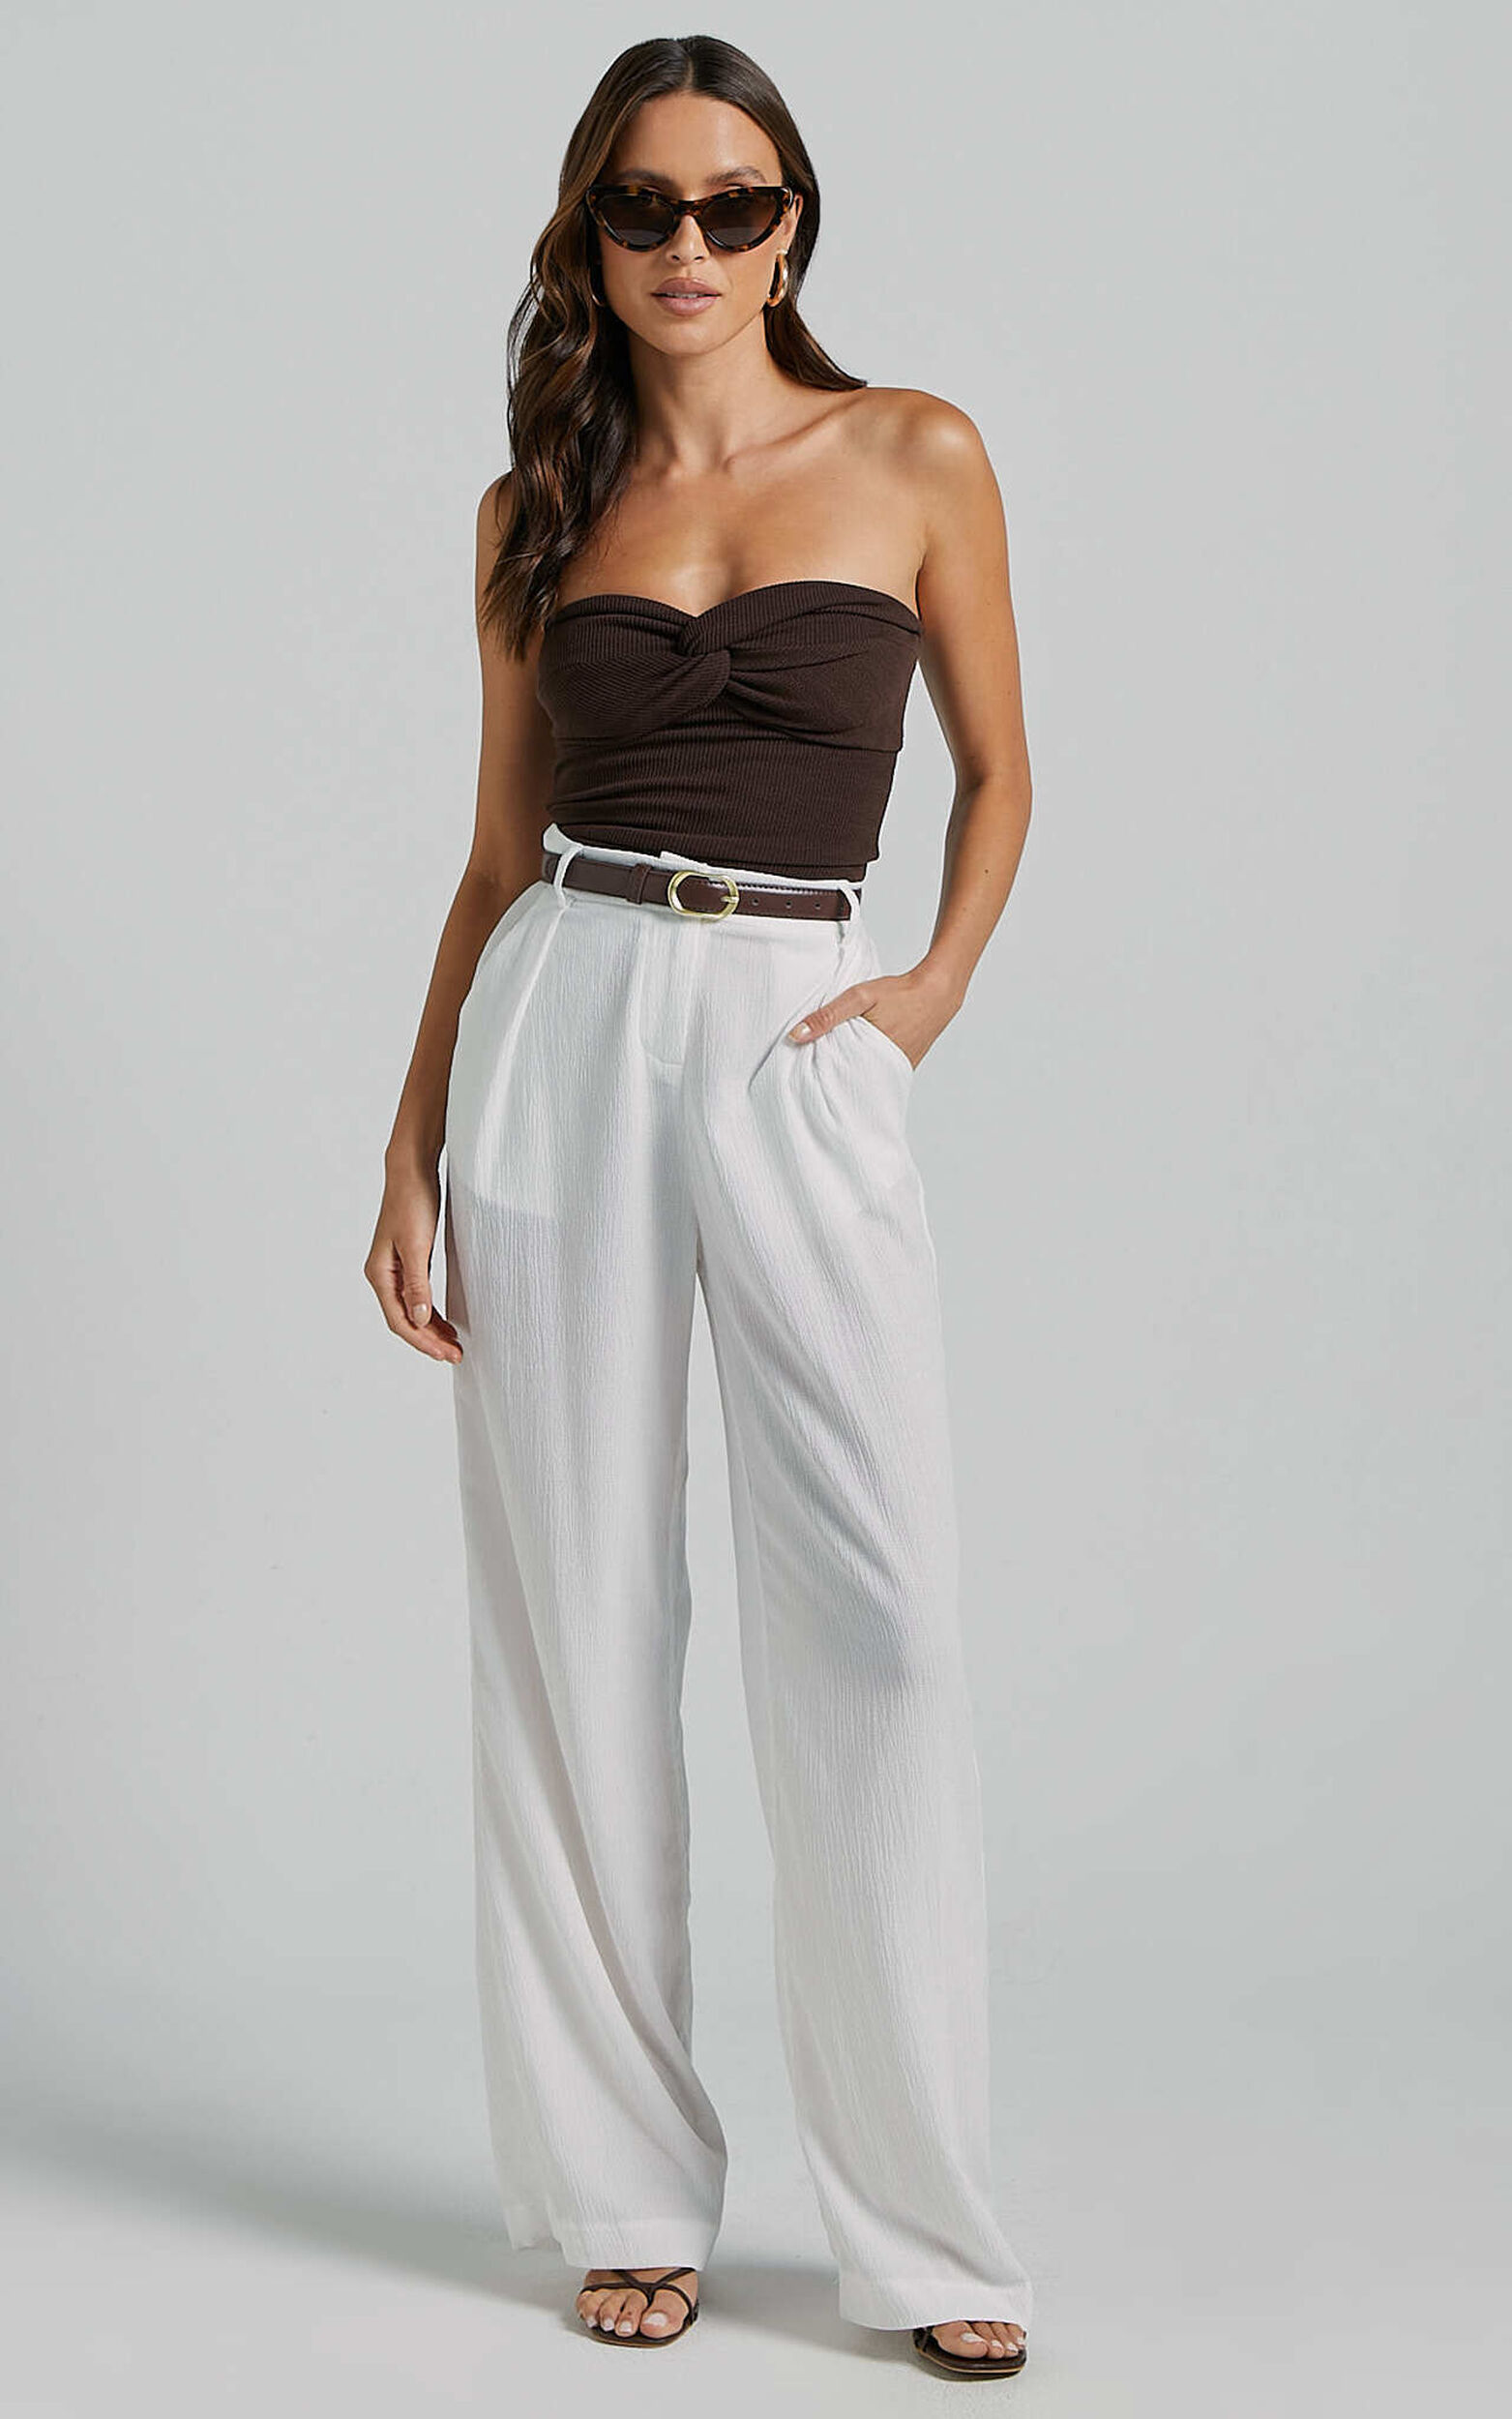 Isabeau Beach Trousers - Mid Rise Crinkle Pleat Relaxed Tailored Pants in White - 04, WHT1